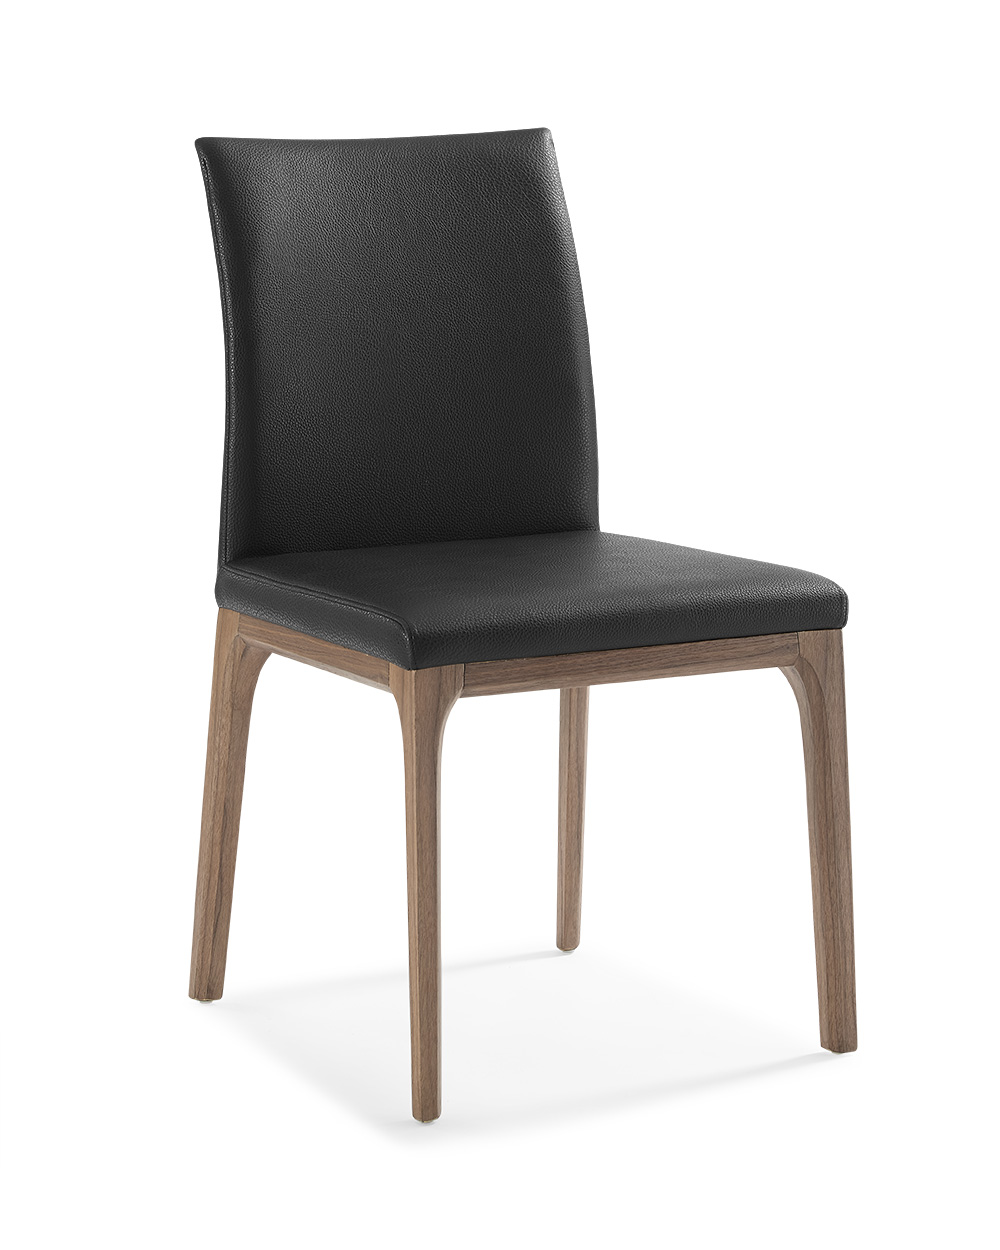 20" X 24" X 35" Black Faux Leather or Metal Dining Chair